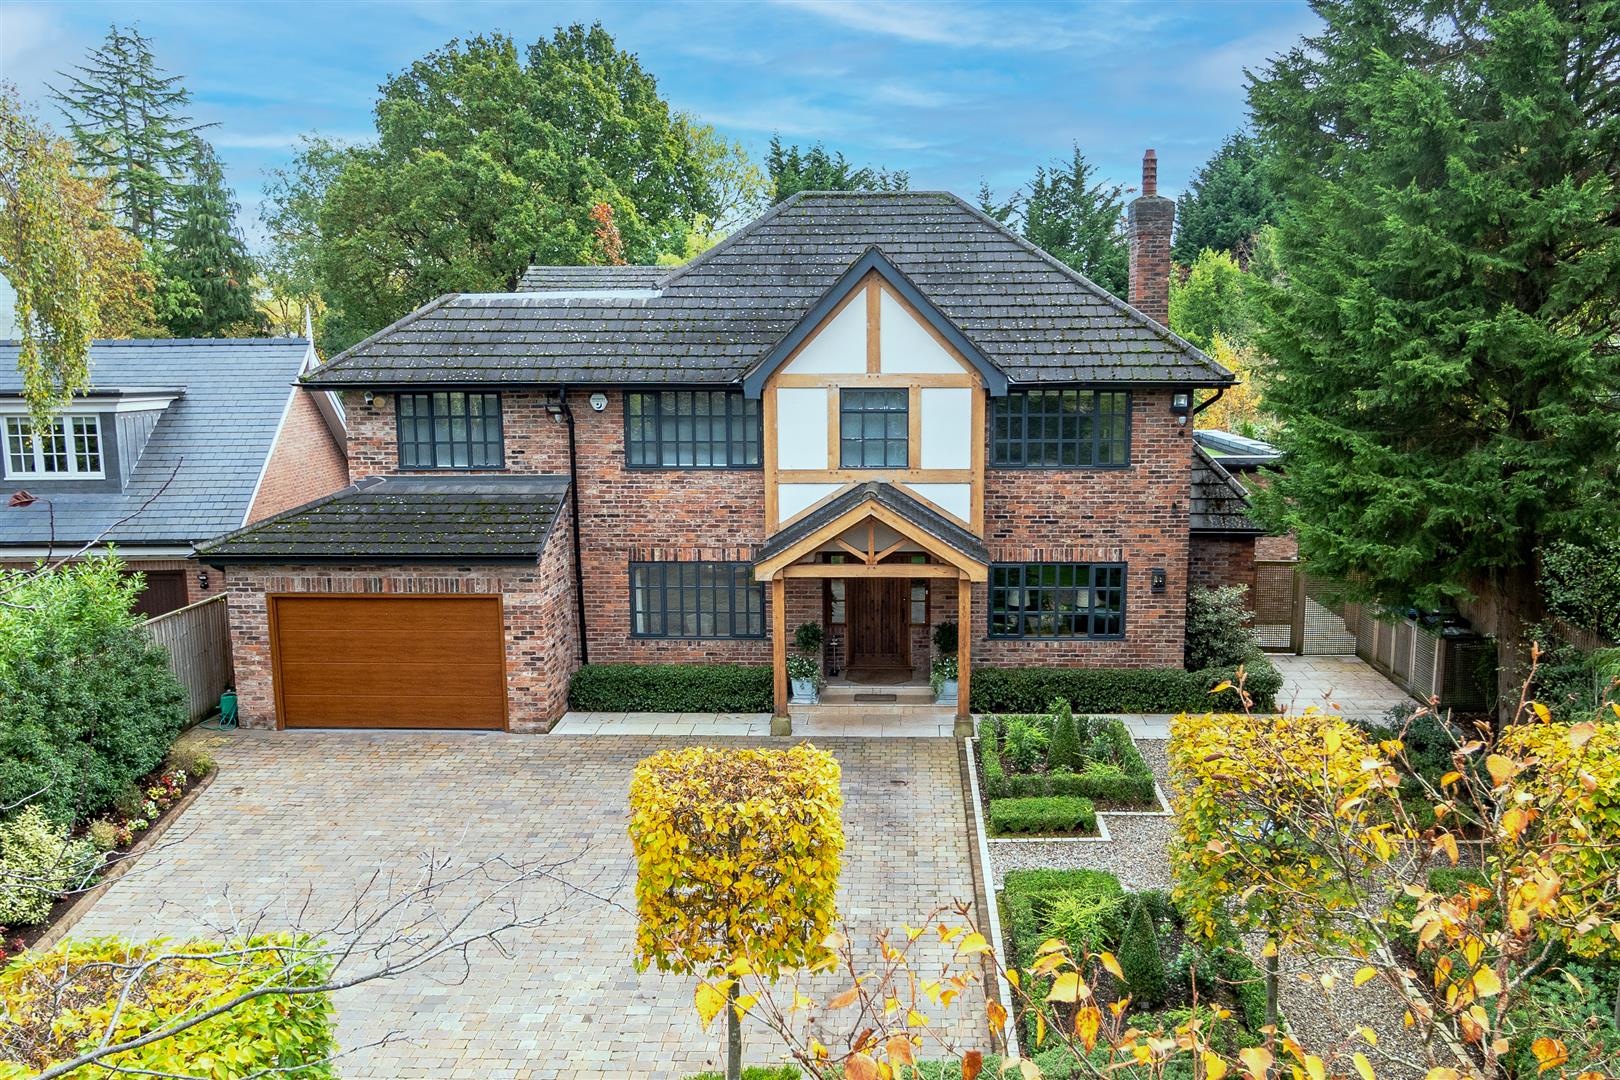 5 bed detached house for sale in Carrwood, Altrincham - Property Image 1